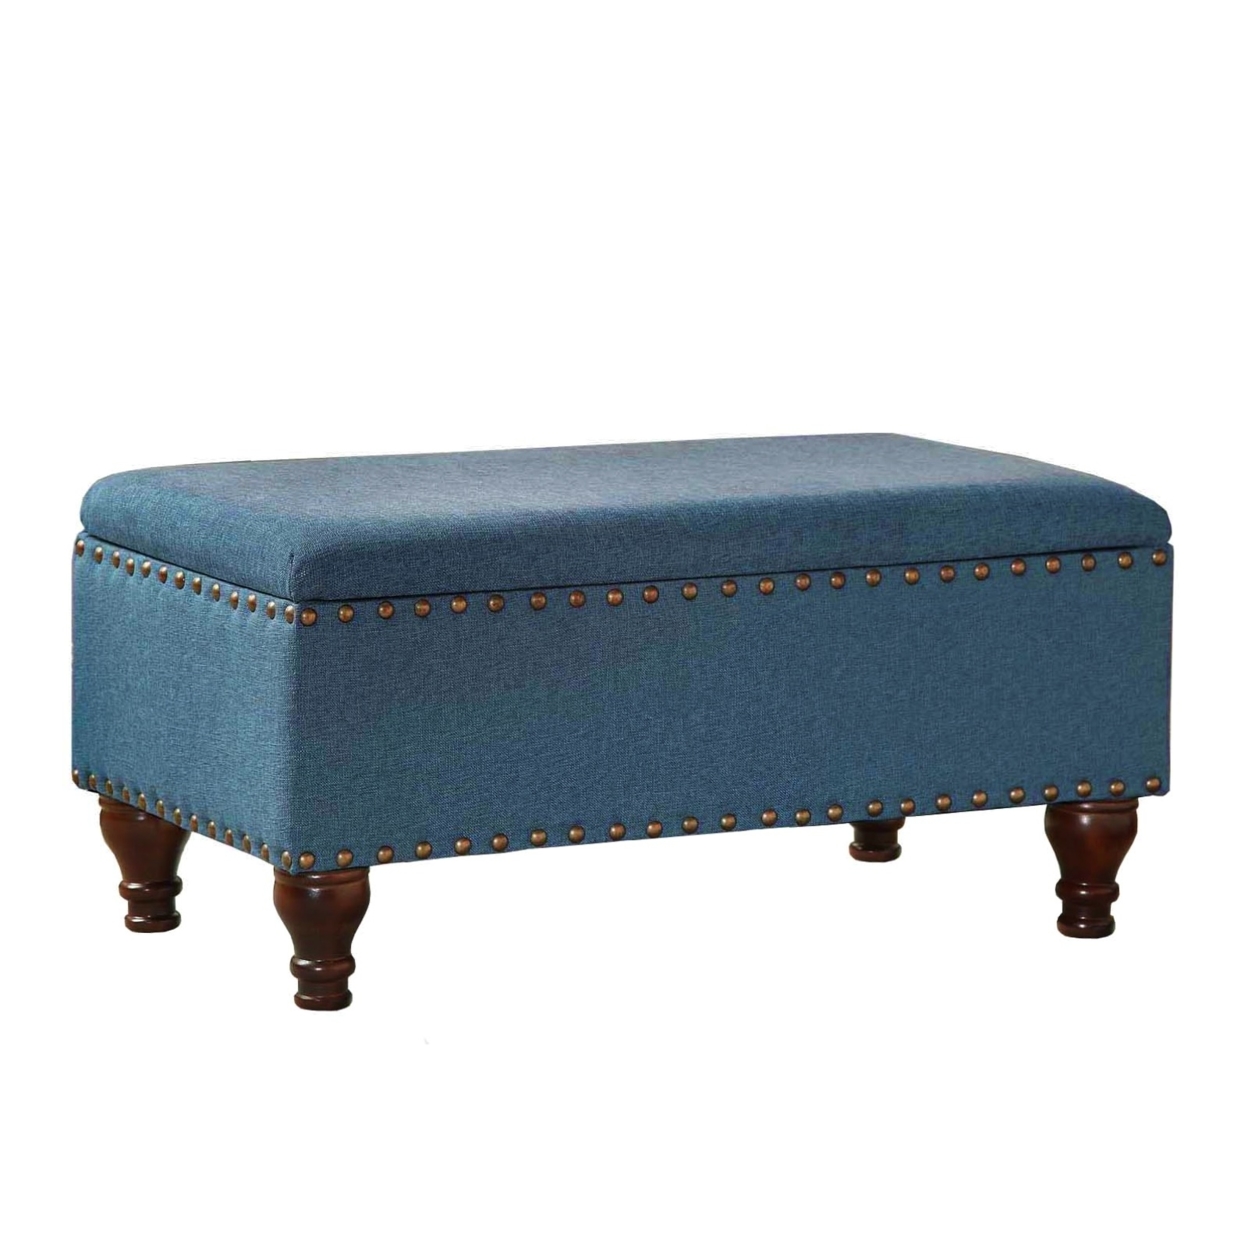 Saltoro Sherpi Fabric Upholstered Wooden Storage Bench With Nail head Trim, Large, Blue and Brown